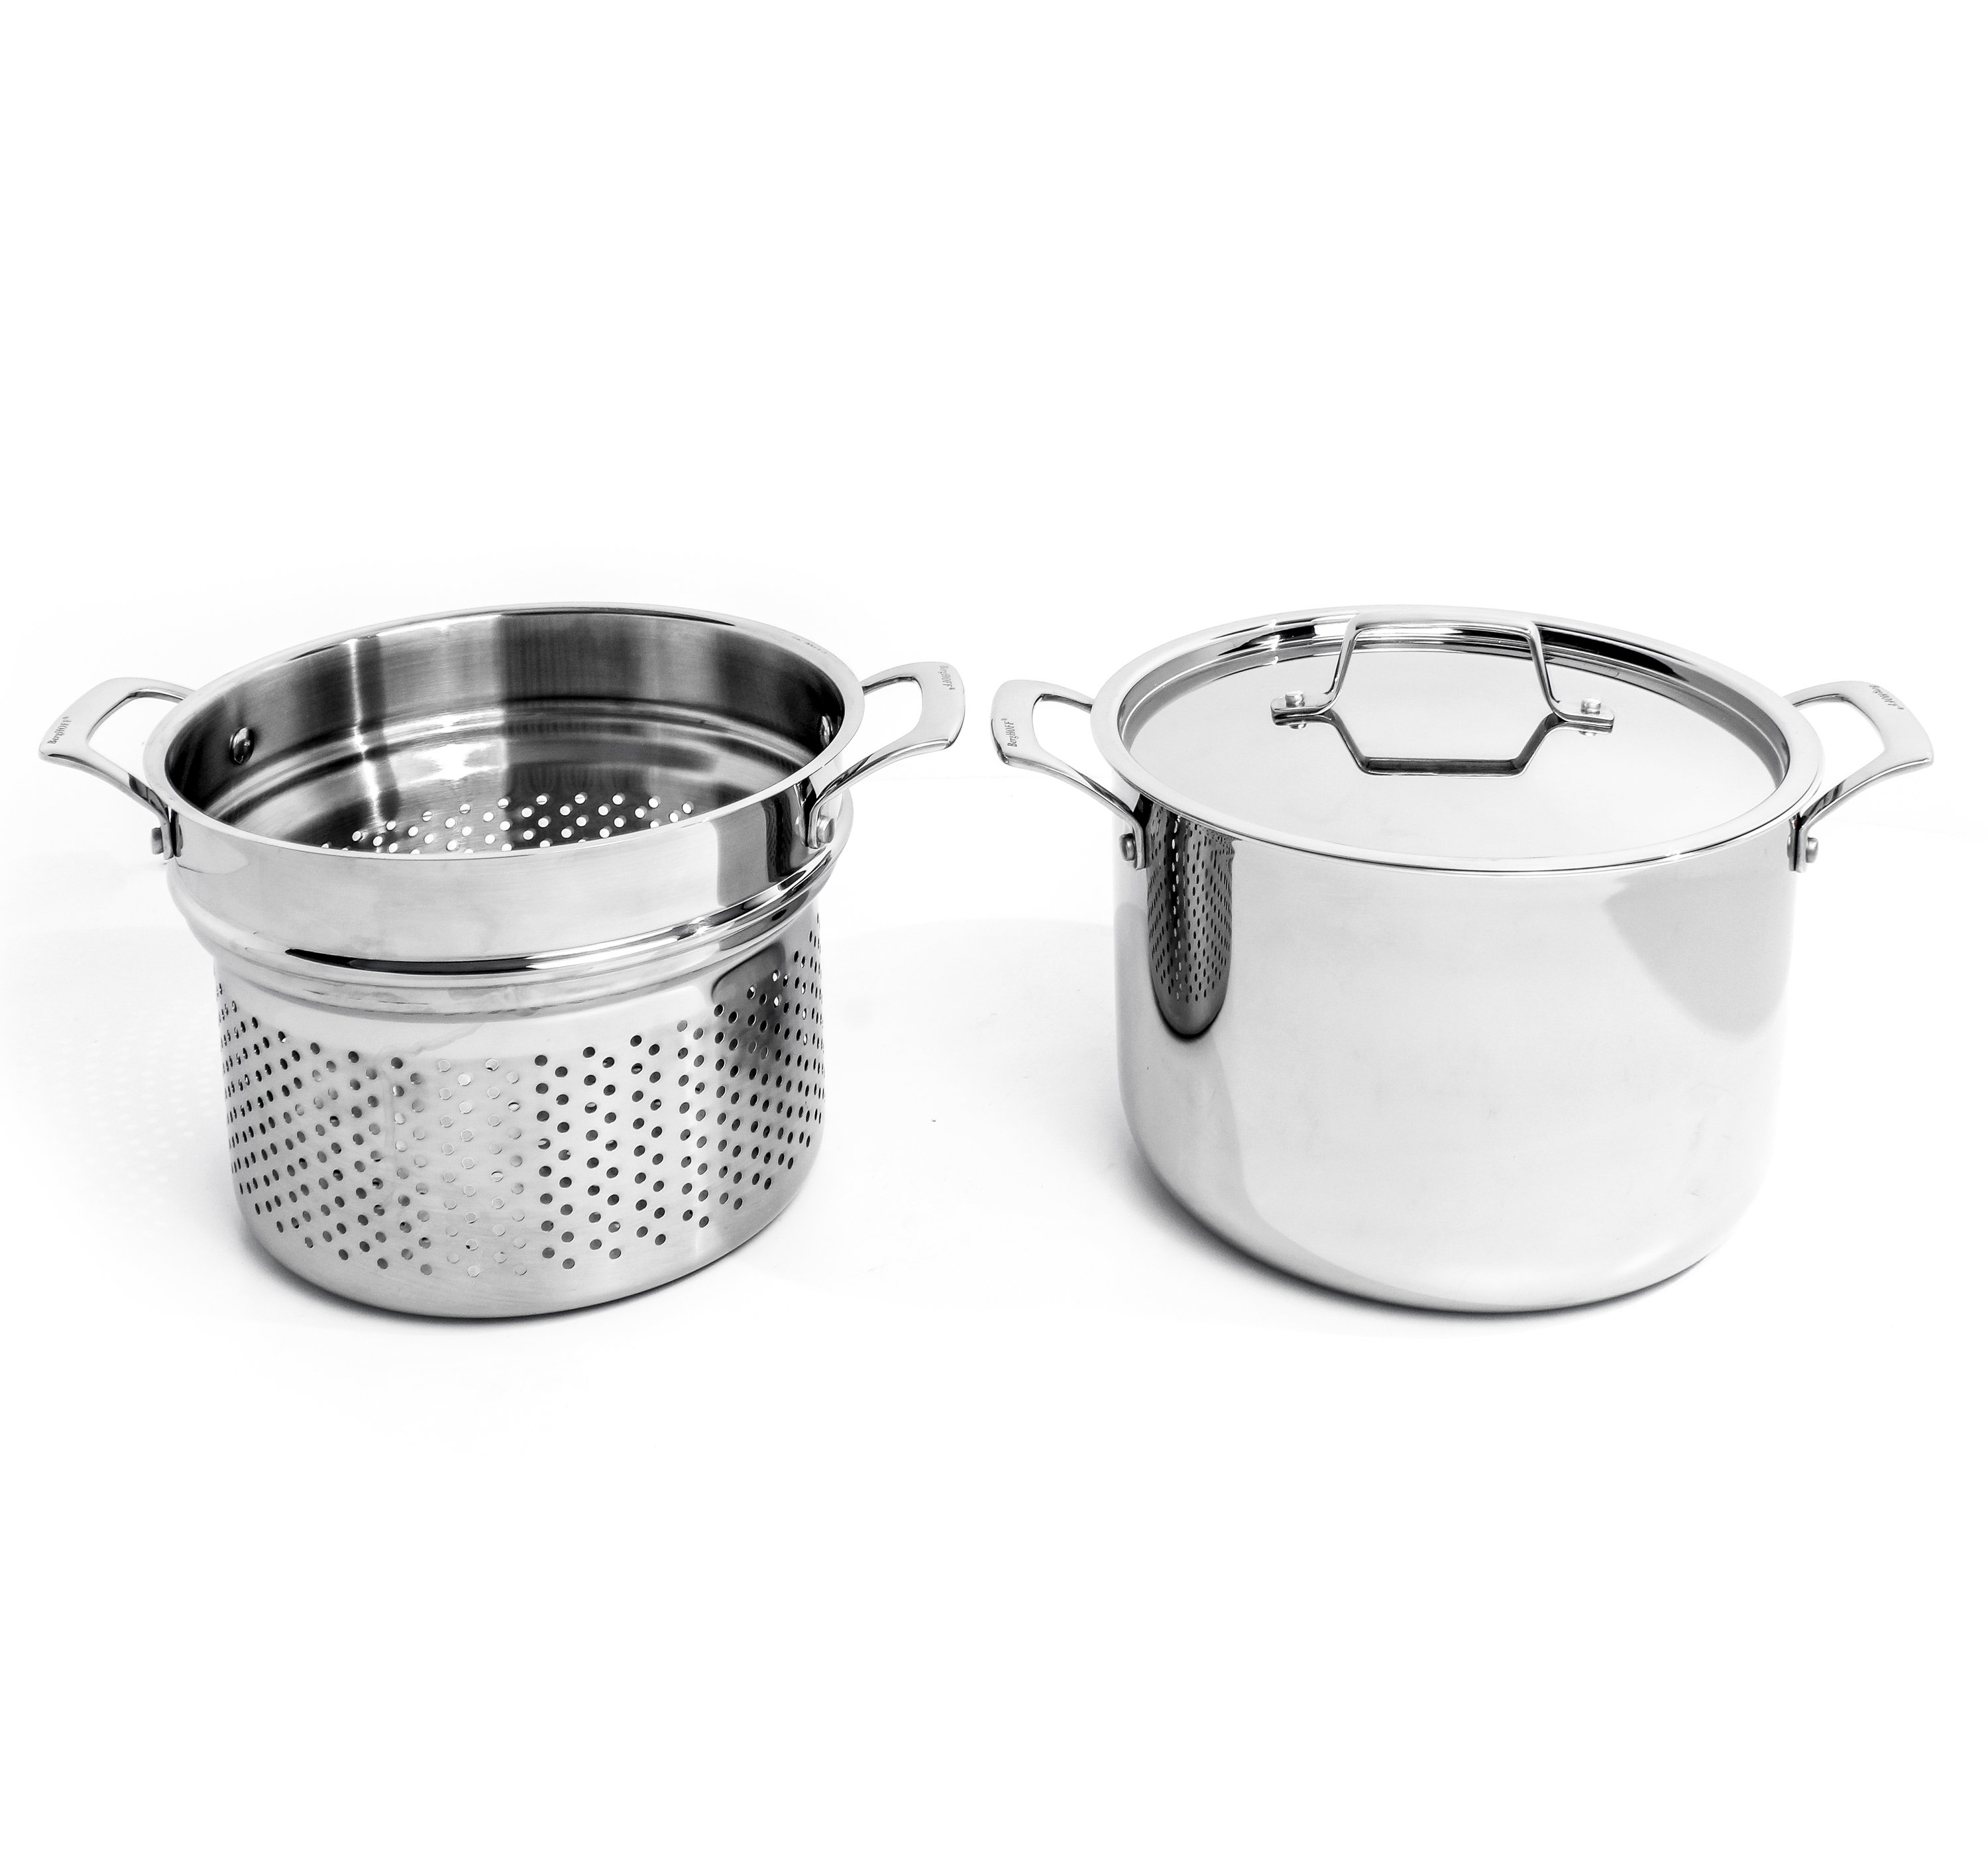  NutriChef 6-Quart Stainless Steel Stock Pot - 18/8